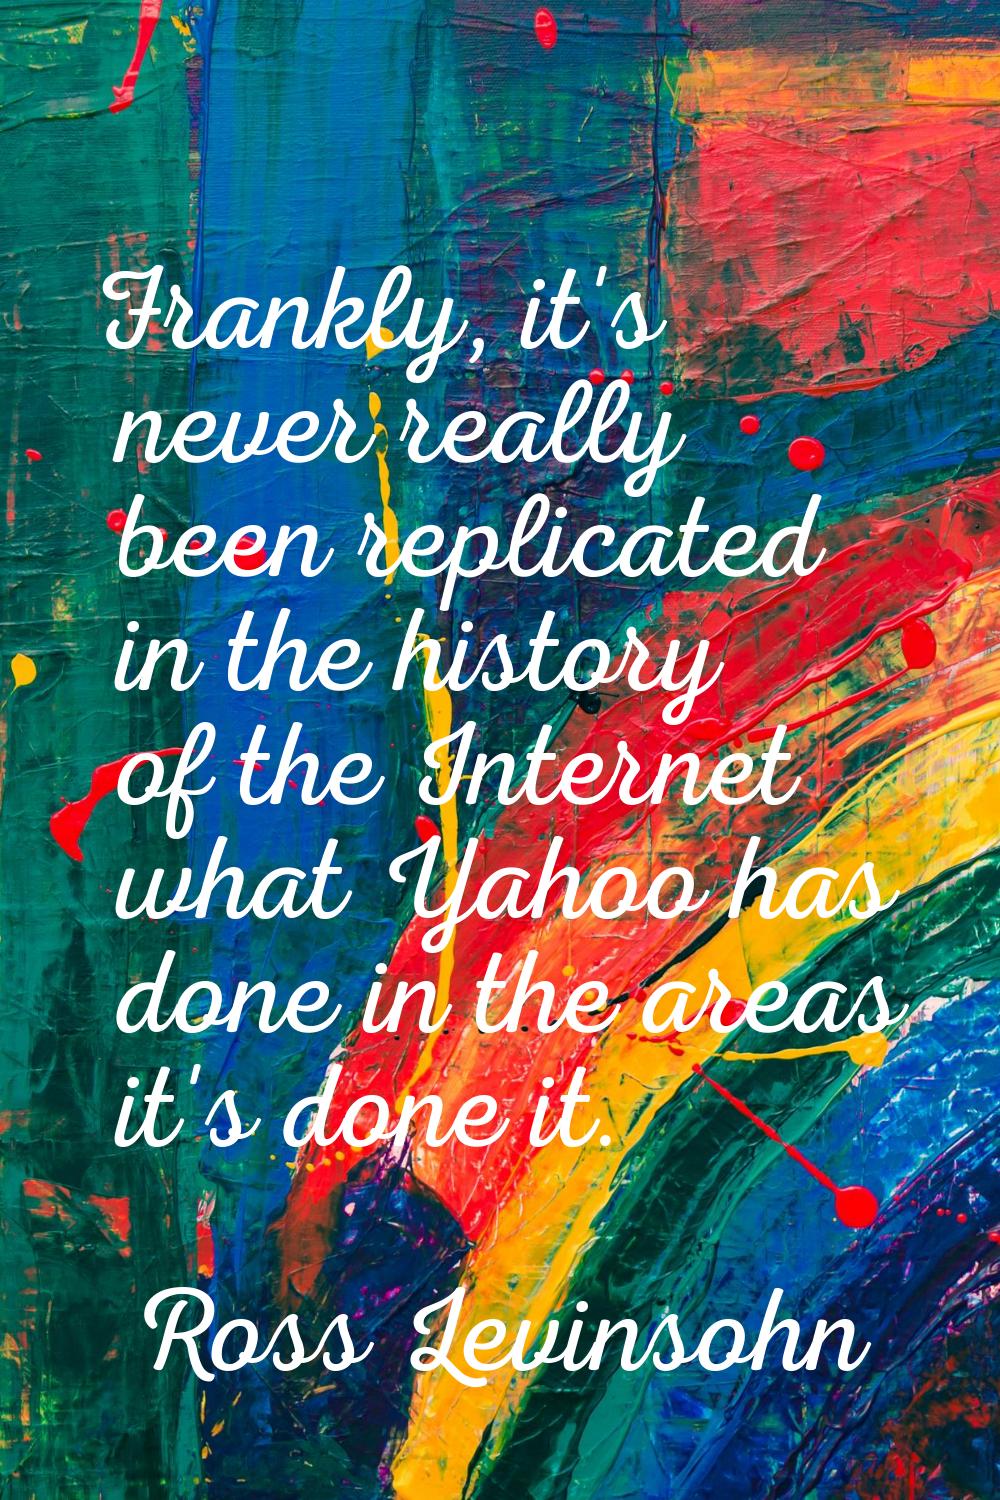 Frankly, it's never really been replicated in the history of the Internet what Yahoo has done in th